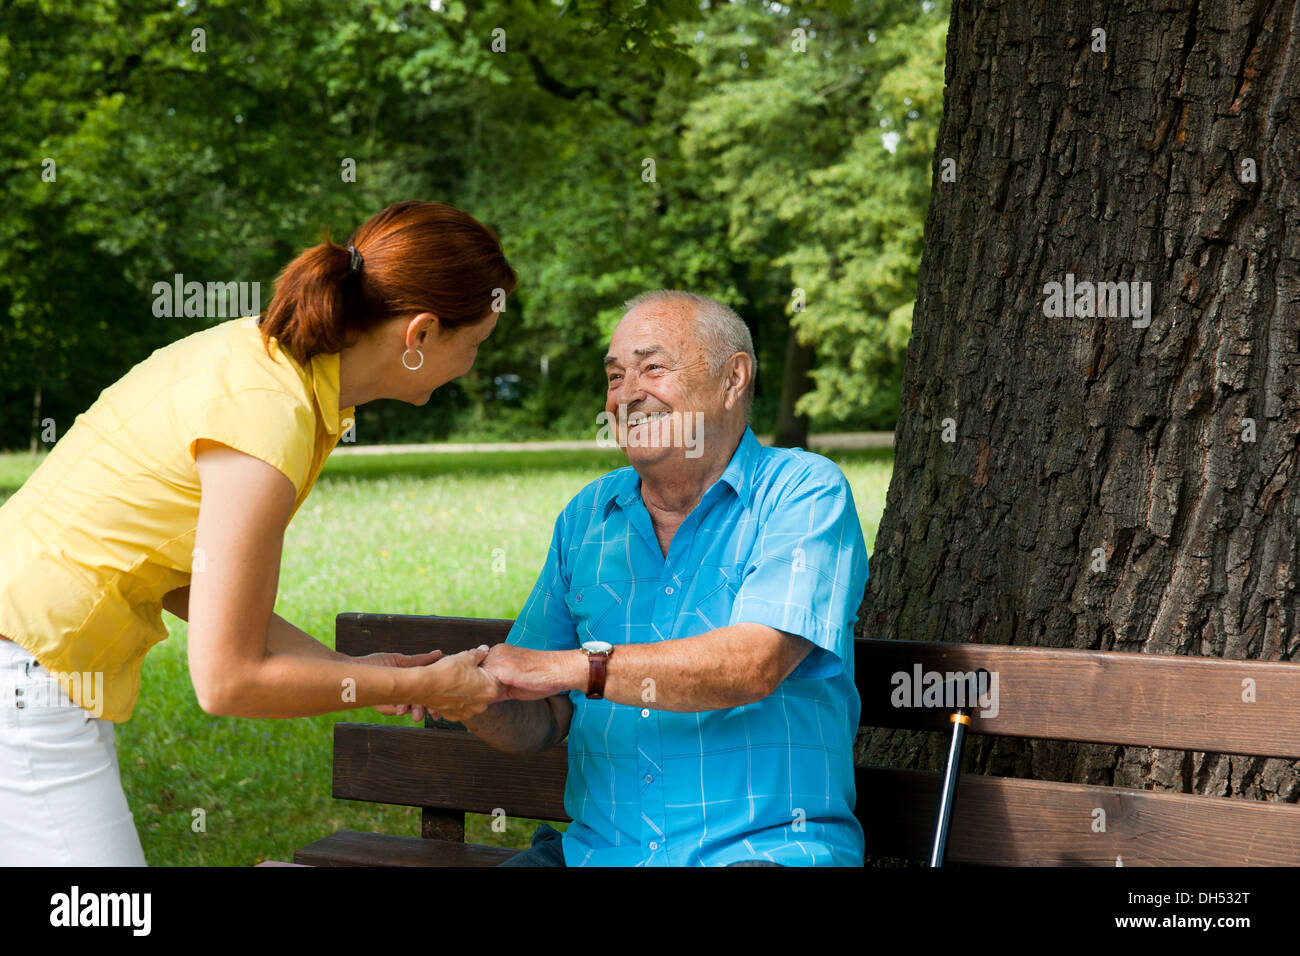 Women looking after an elderly man sitting on a bench in a park Stock Photo